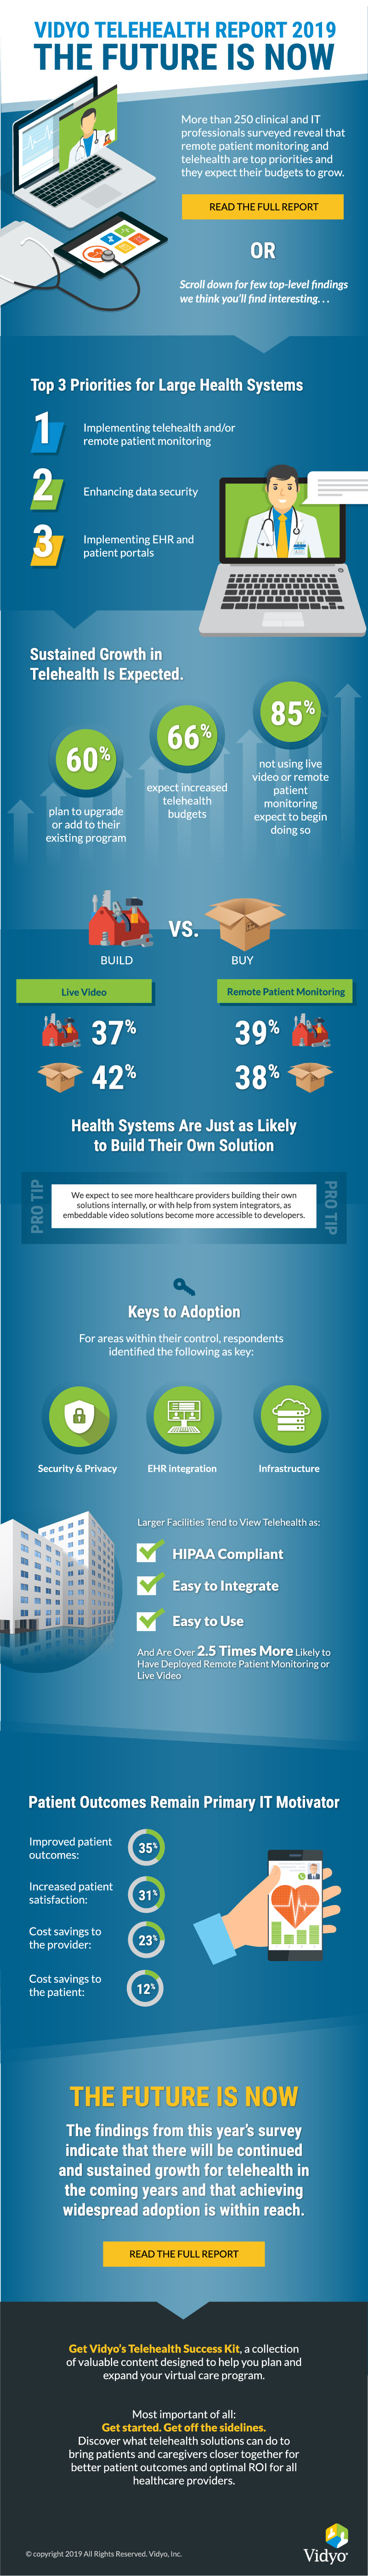 2019 Healthcare Trends Infographic